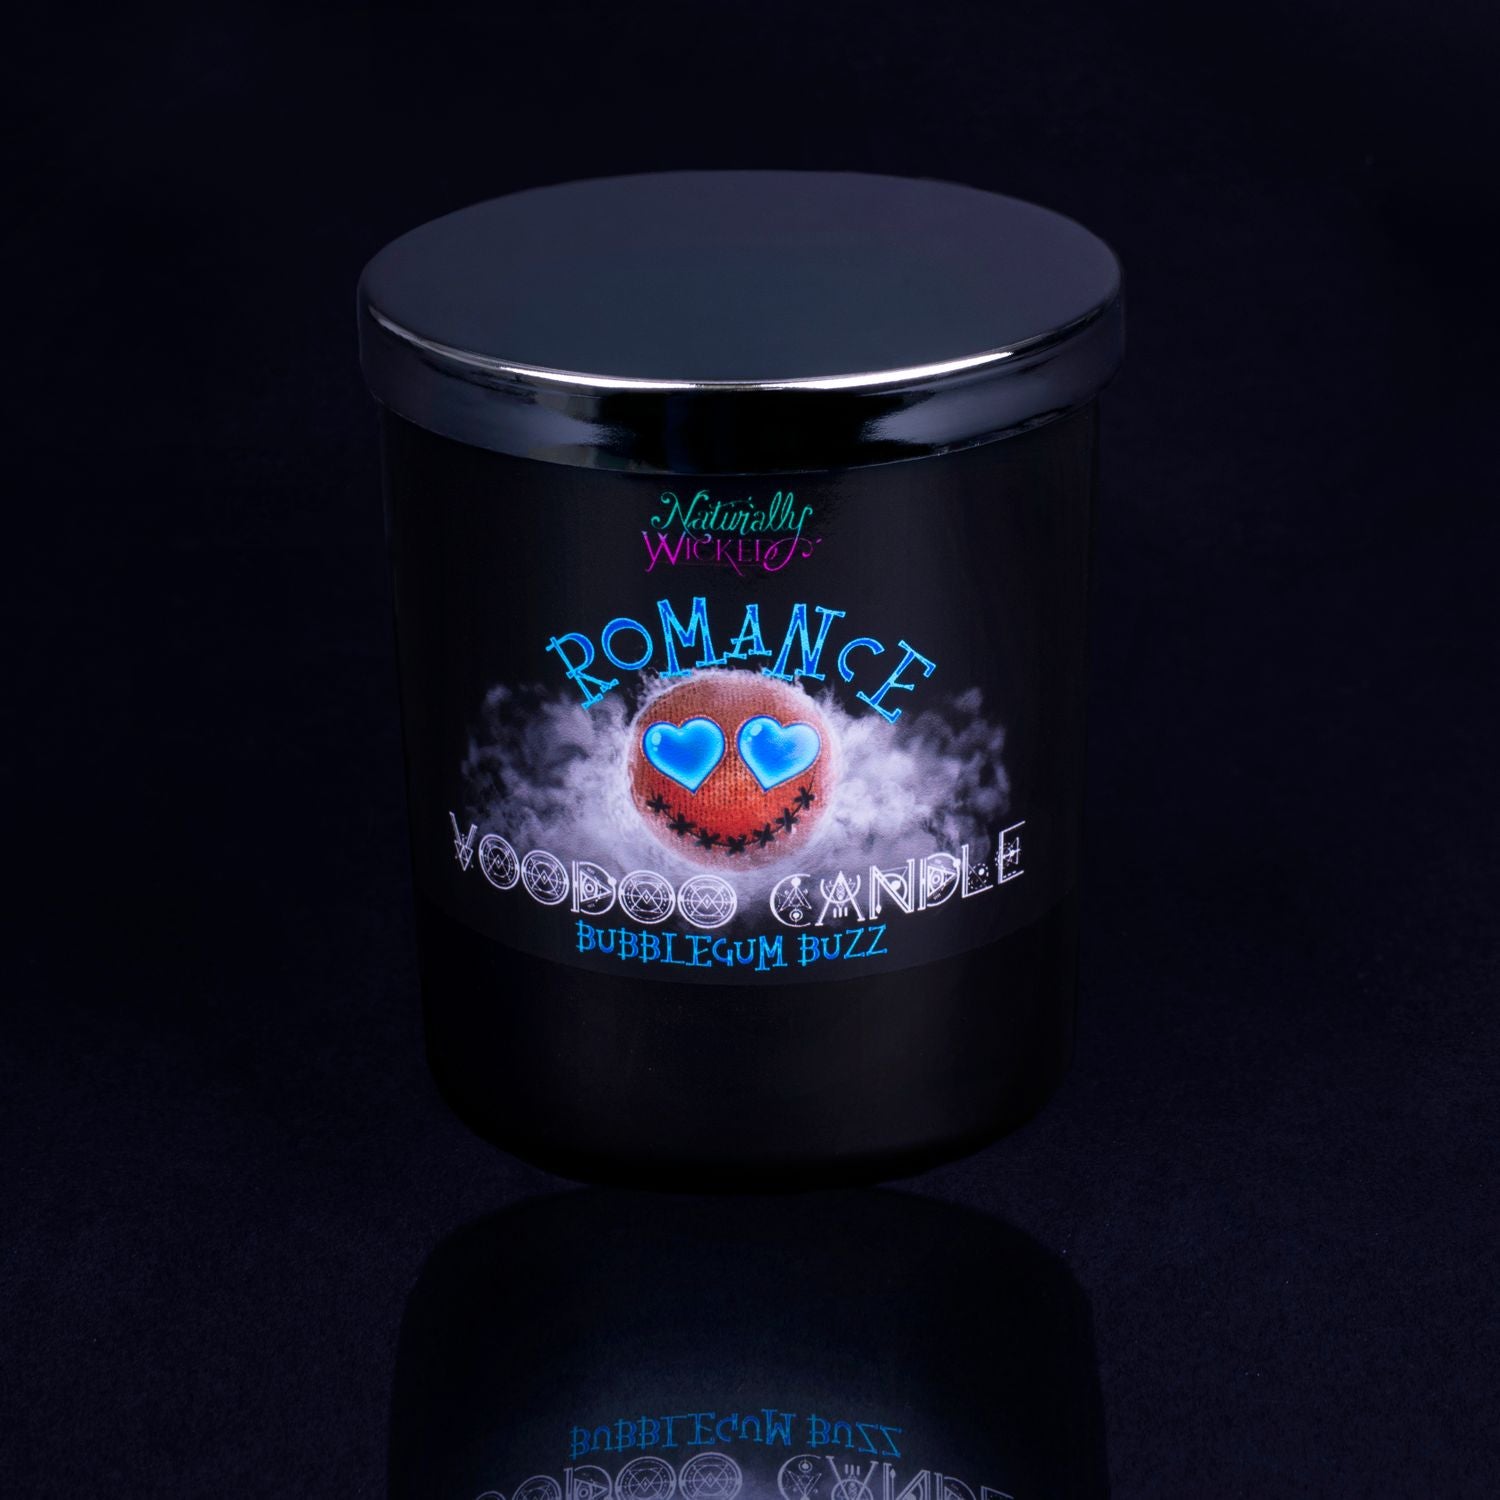 Naturally Wicked Voodoo Romance Spell Candle With Mirror Finished Exquisite Lid In Place. Featuring A Black Gloss Label, A Voodoo Doll Design And Bubblegum Buzz Scent.